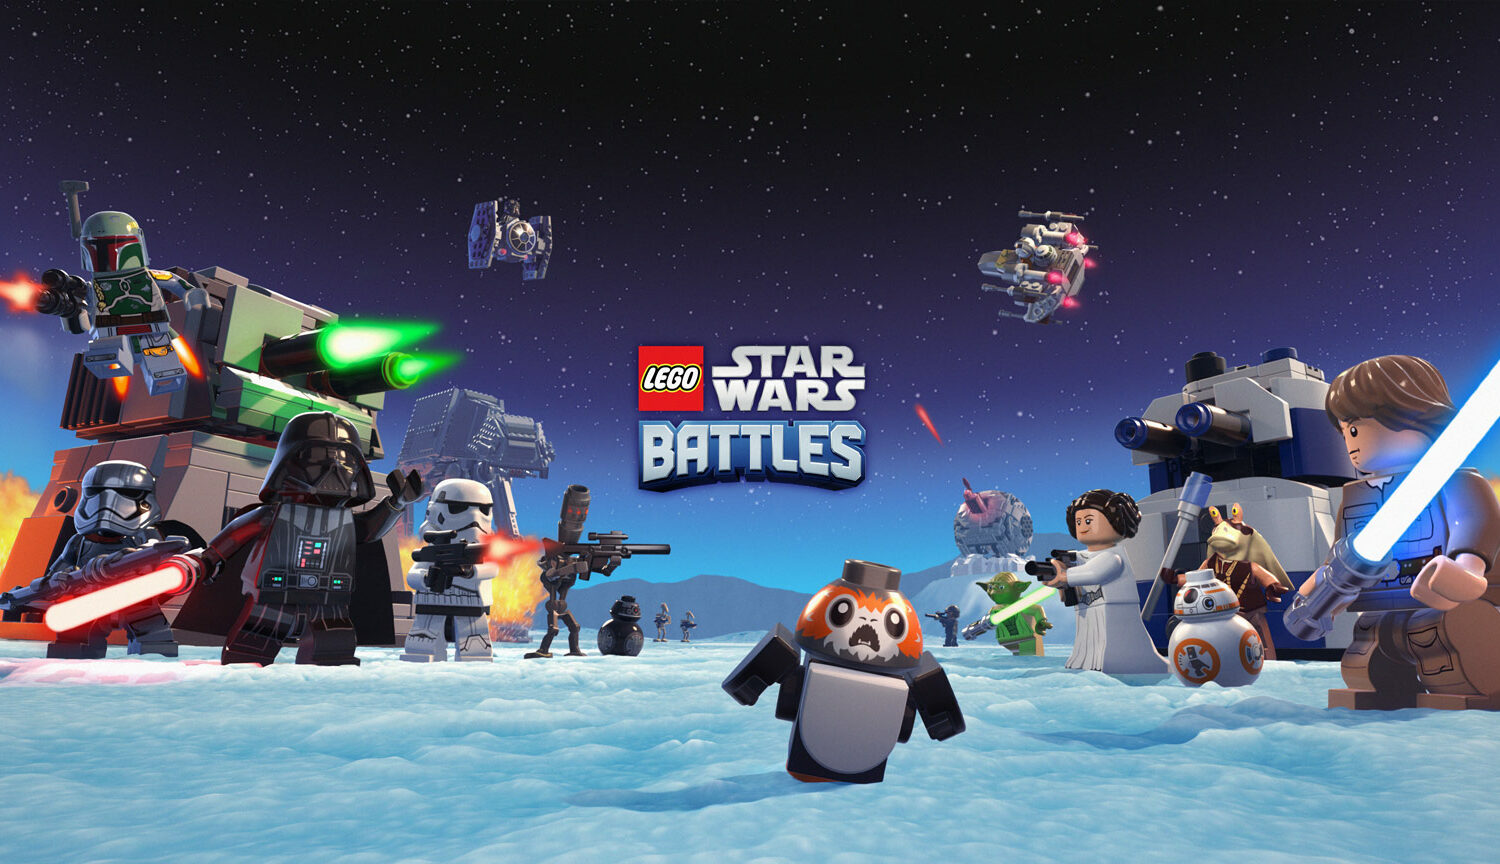 Hero image for the game “Lego Star Wars Battles”